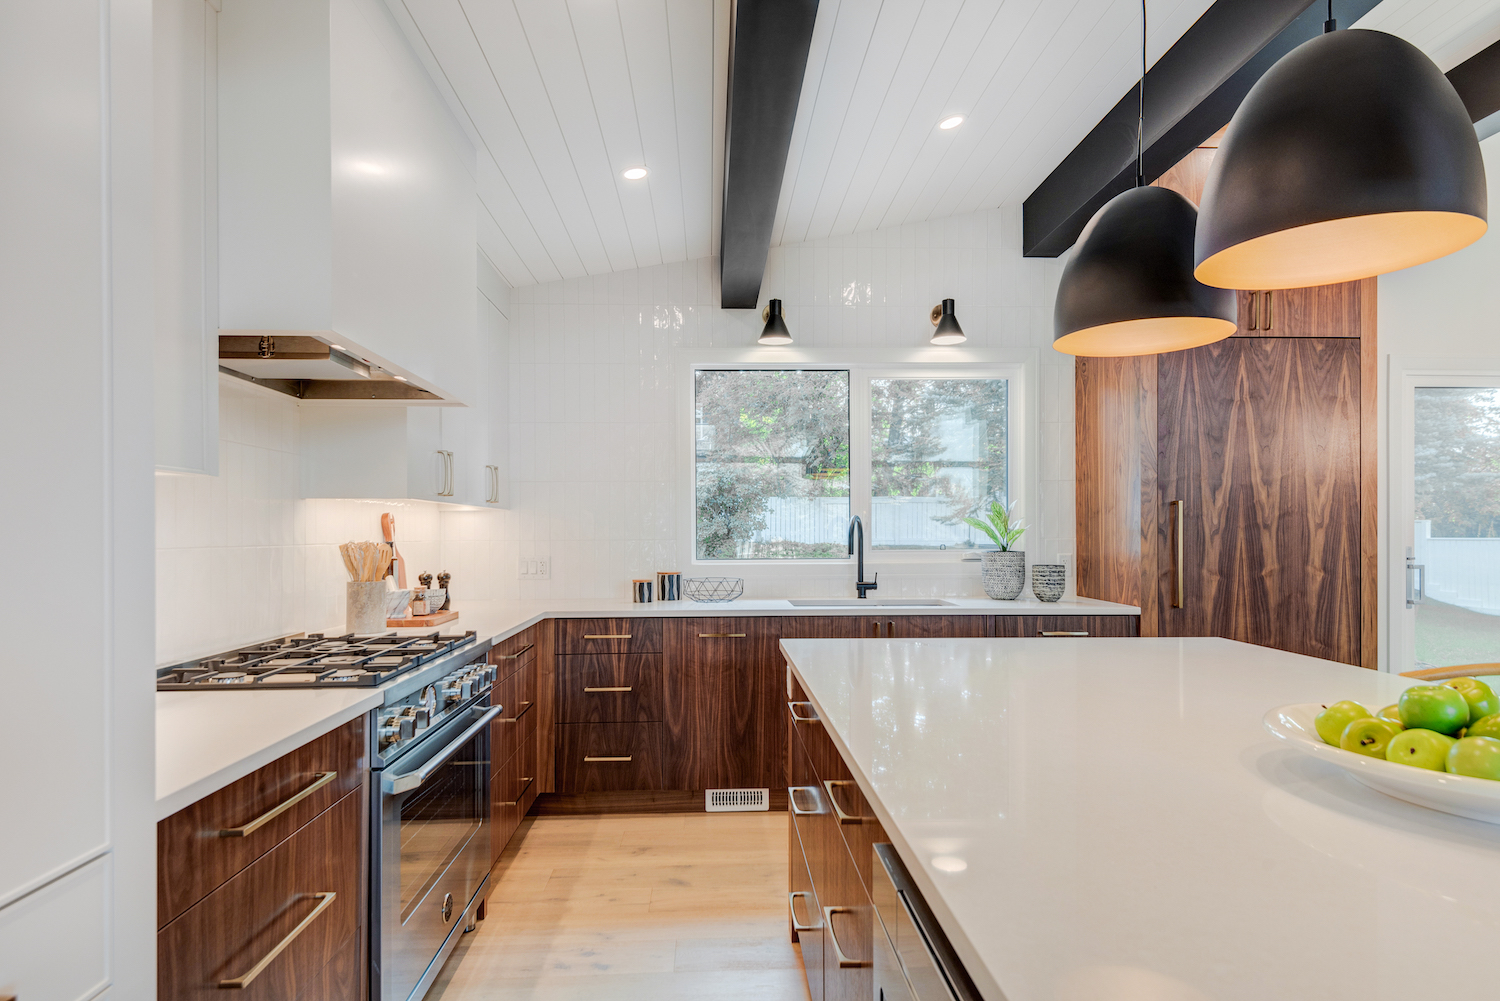 Bright and open kitchen with dark wood, white stone countertops, gold hardware and black lighting